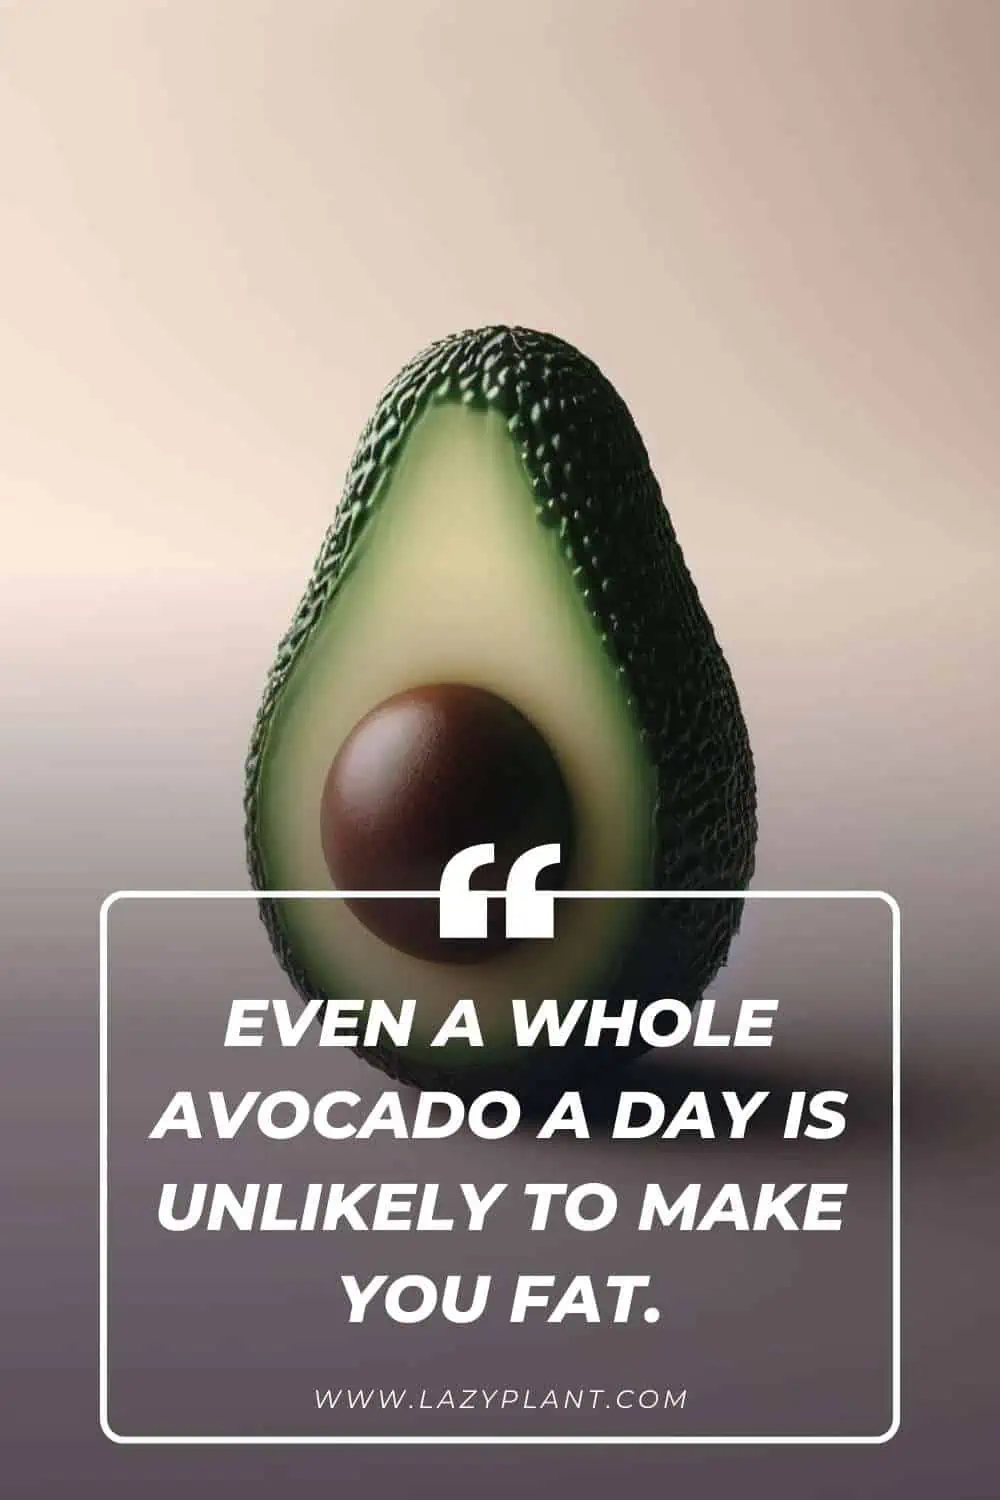 Eating Avocados while Dieting | Avocado Quote